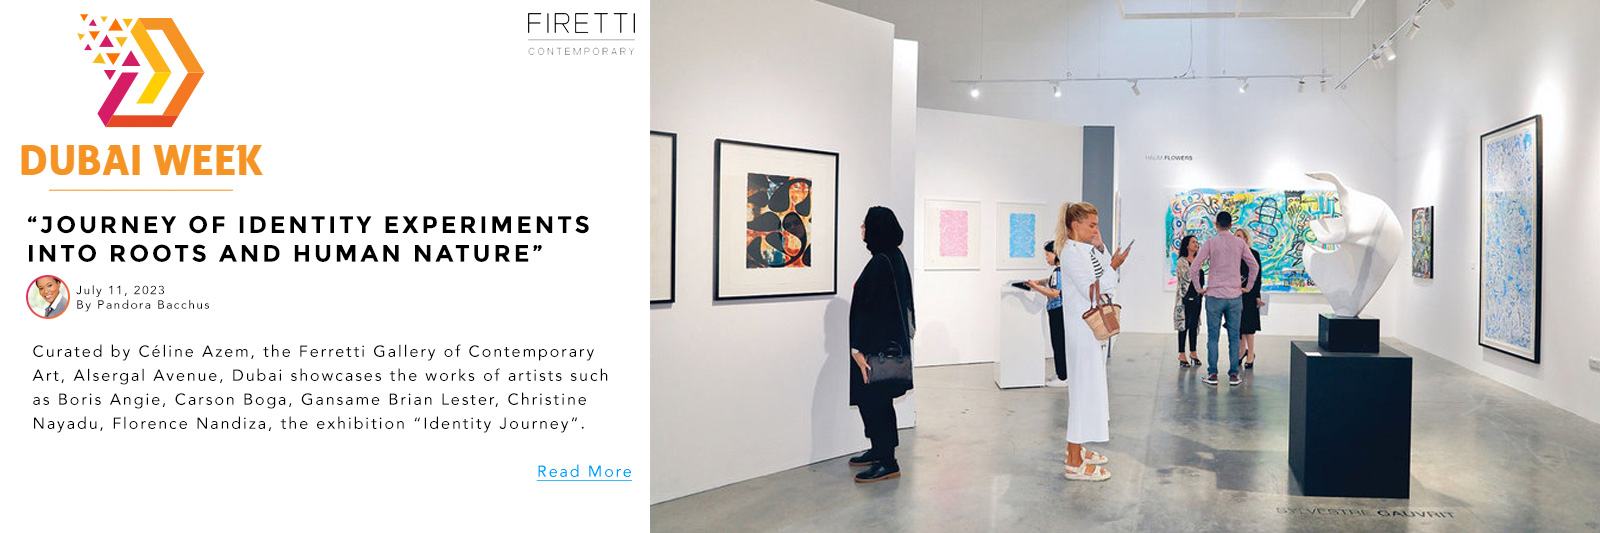 Dubai Week Published July 11, 2023 By Pandora Bacchus ENTERTAINMENT“Journey of Identity”…experiments into “roots” and human nature at Firetti Contemporary in Dubai